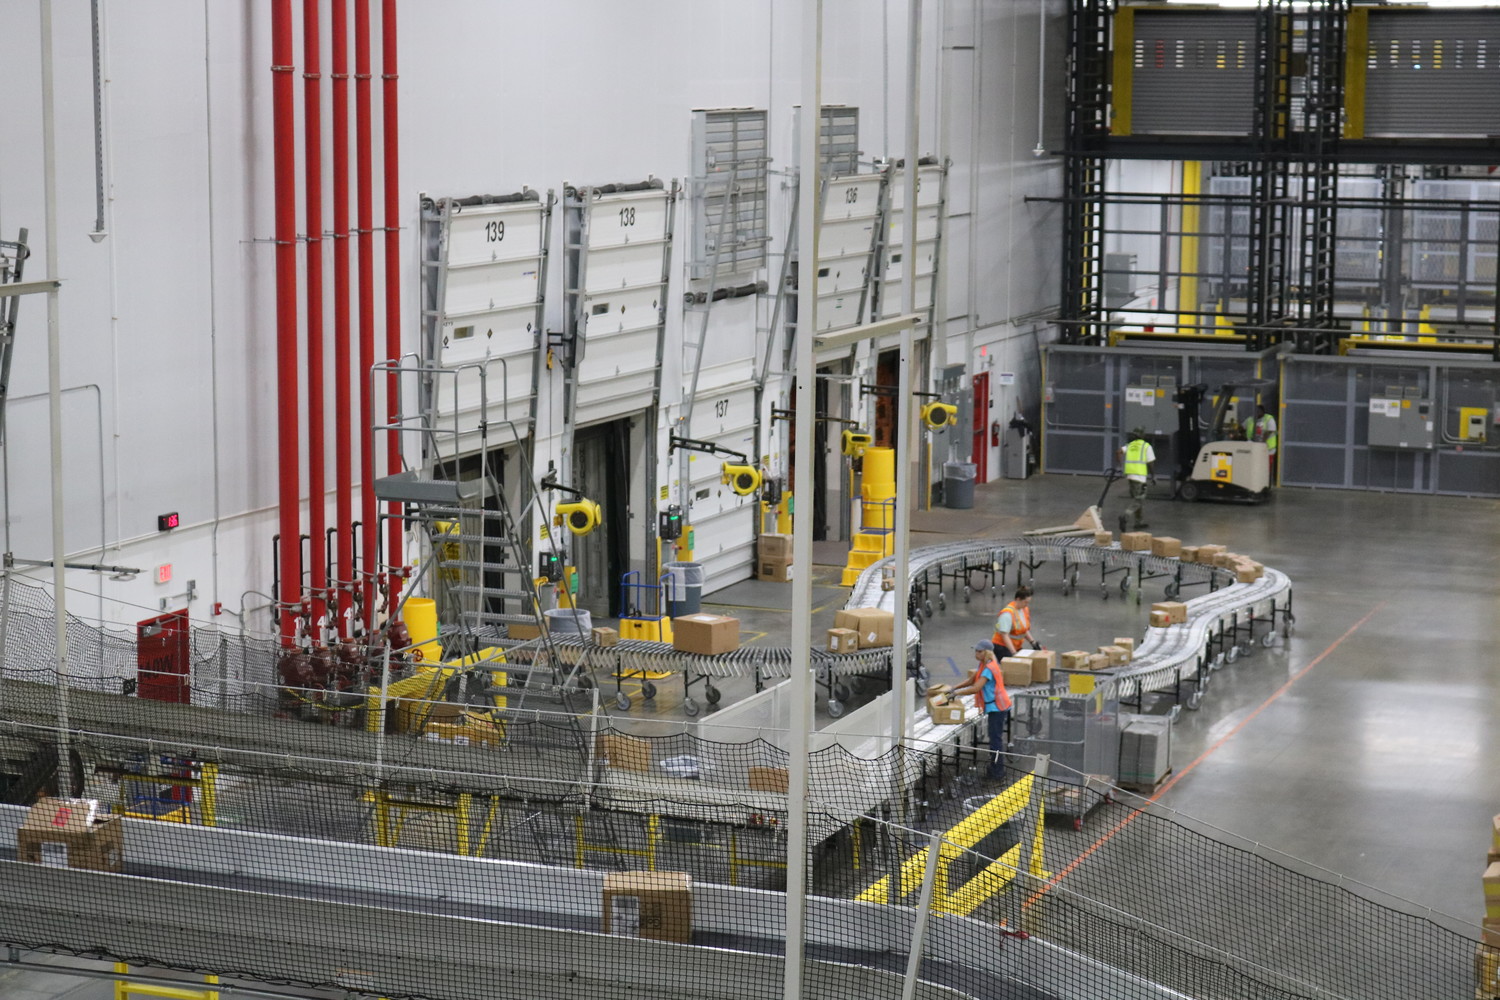 Conveyor belts move packages to a shipping area at the new Amazon facility.